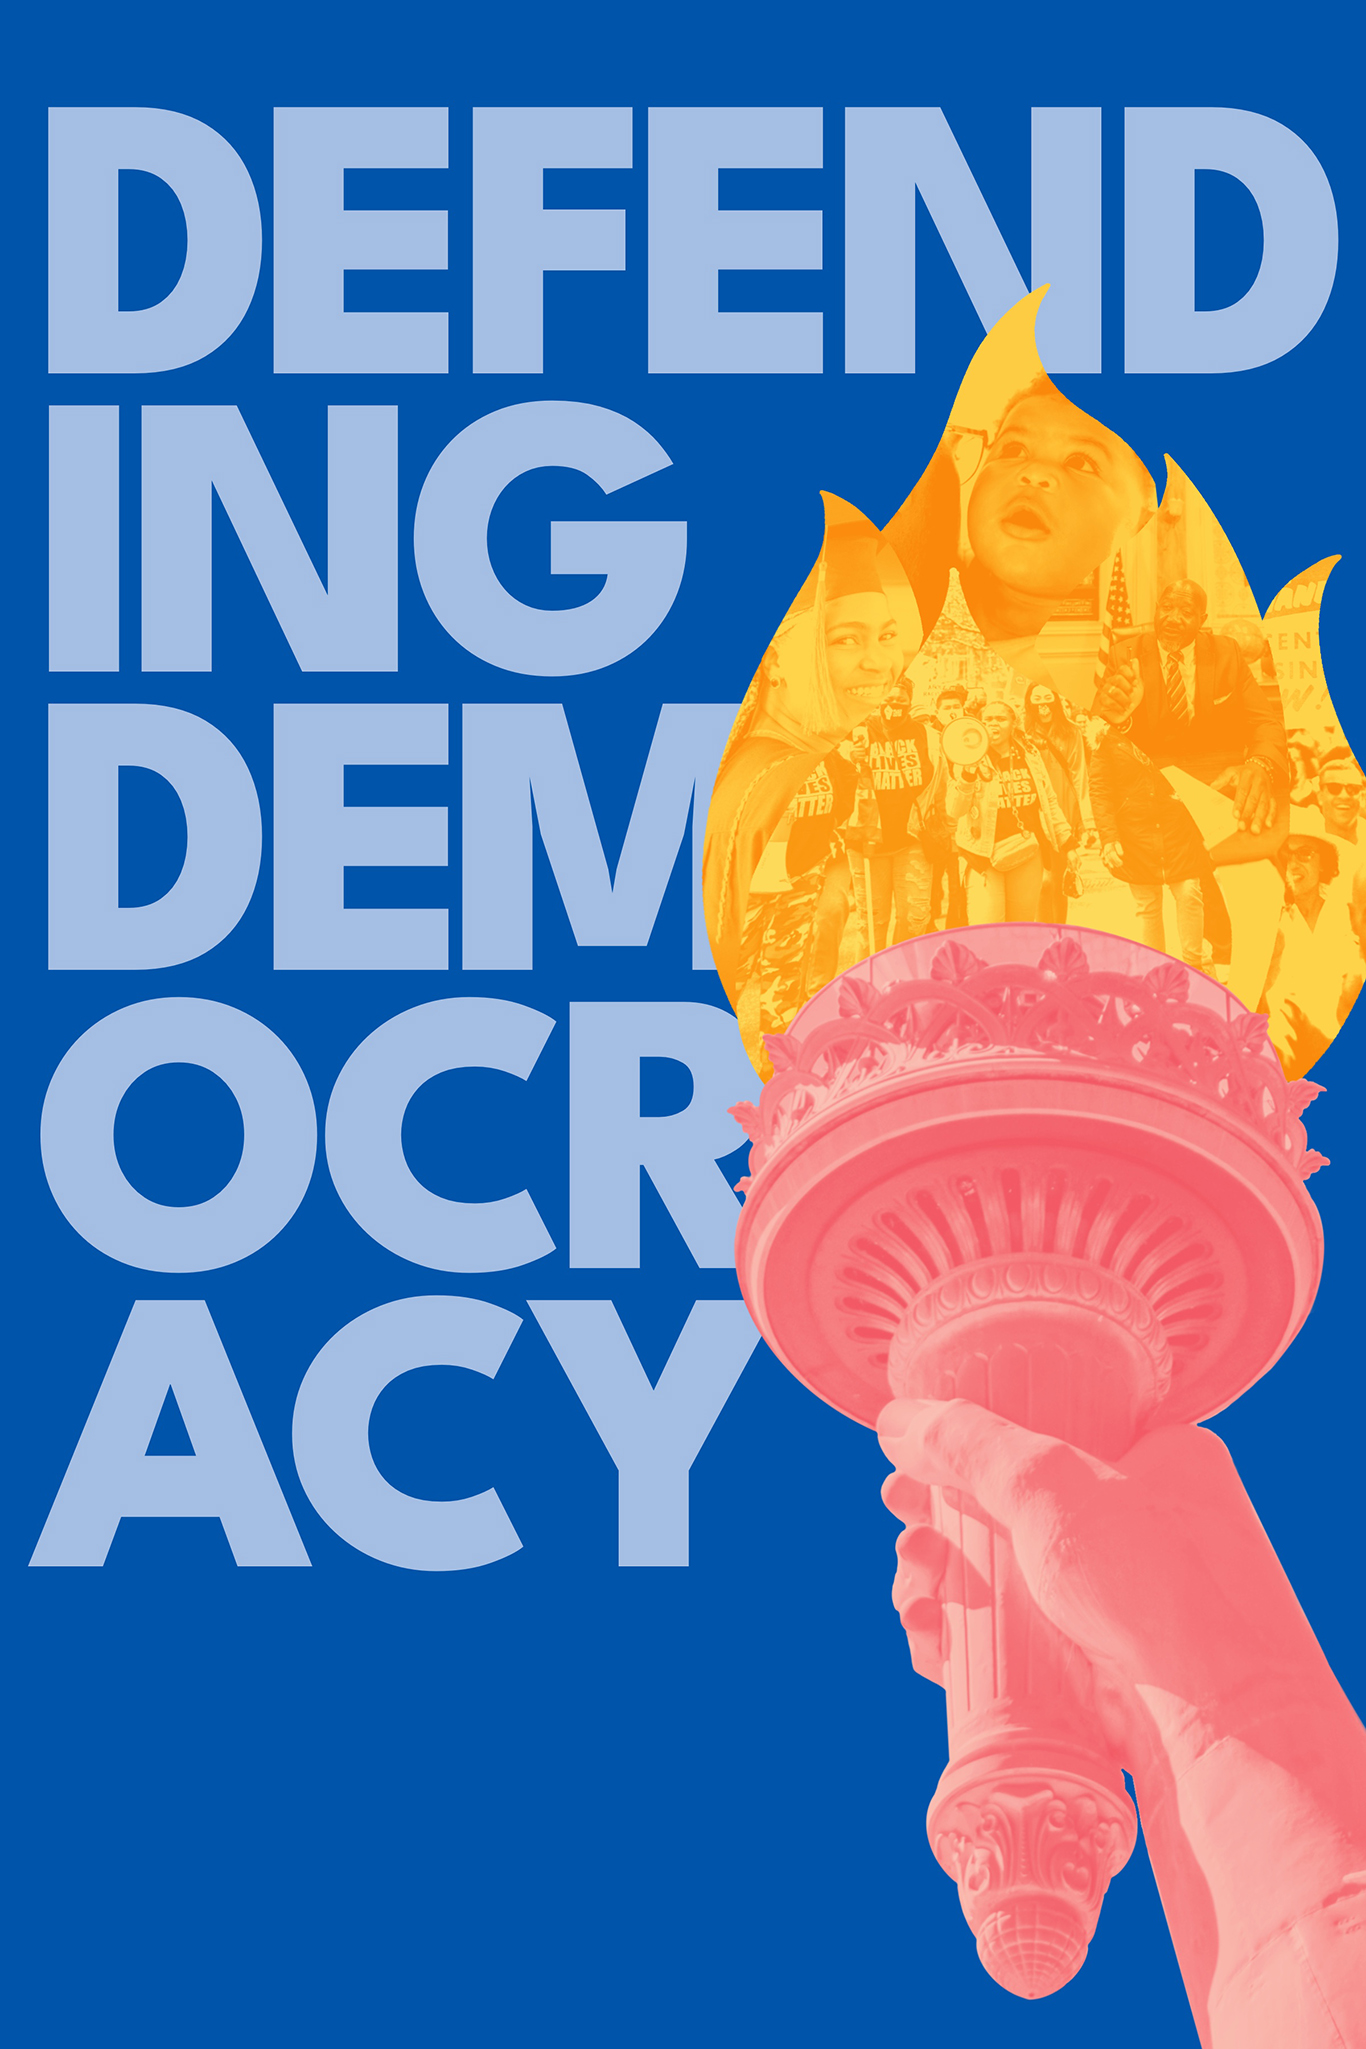 A blue poster with light blue text that reads "Defending Democracy" and a pink hand holding a pink goblet with an orange flame that contains a collage of images of multiracial people.